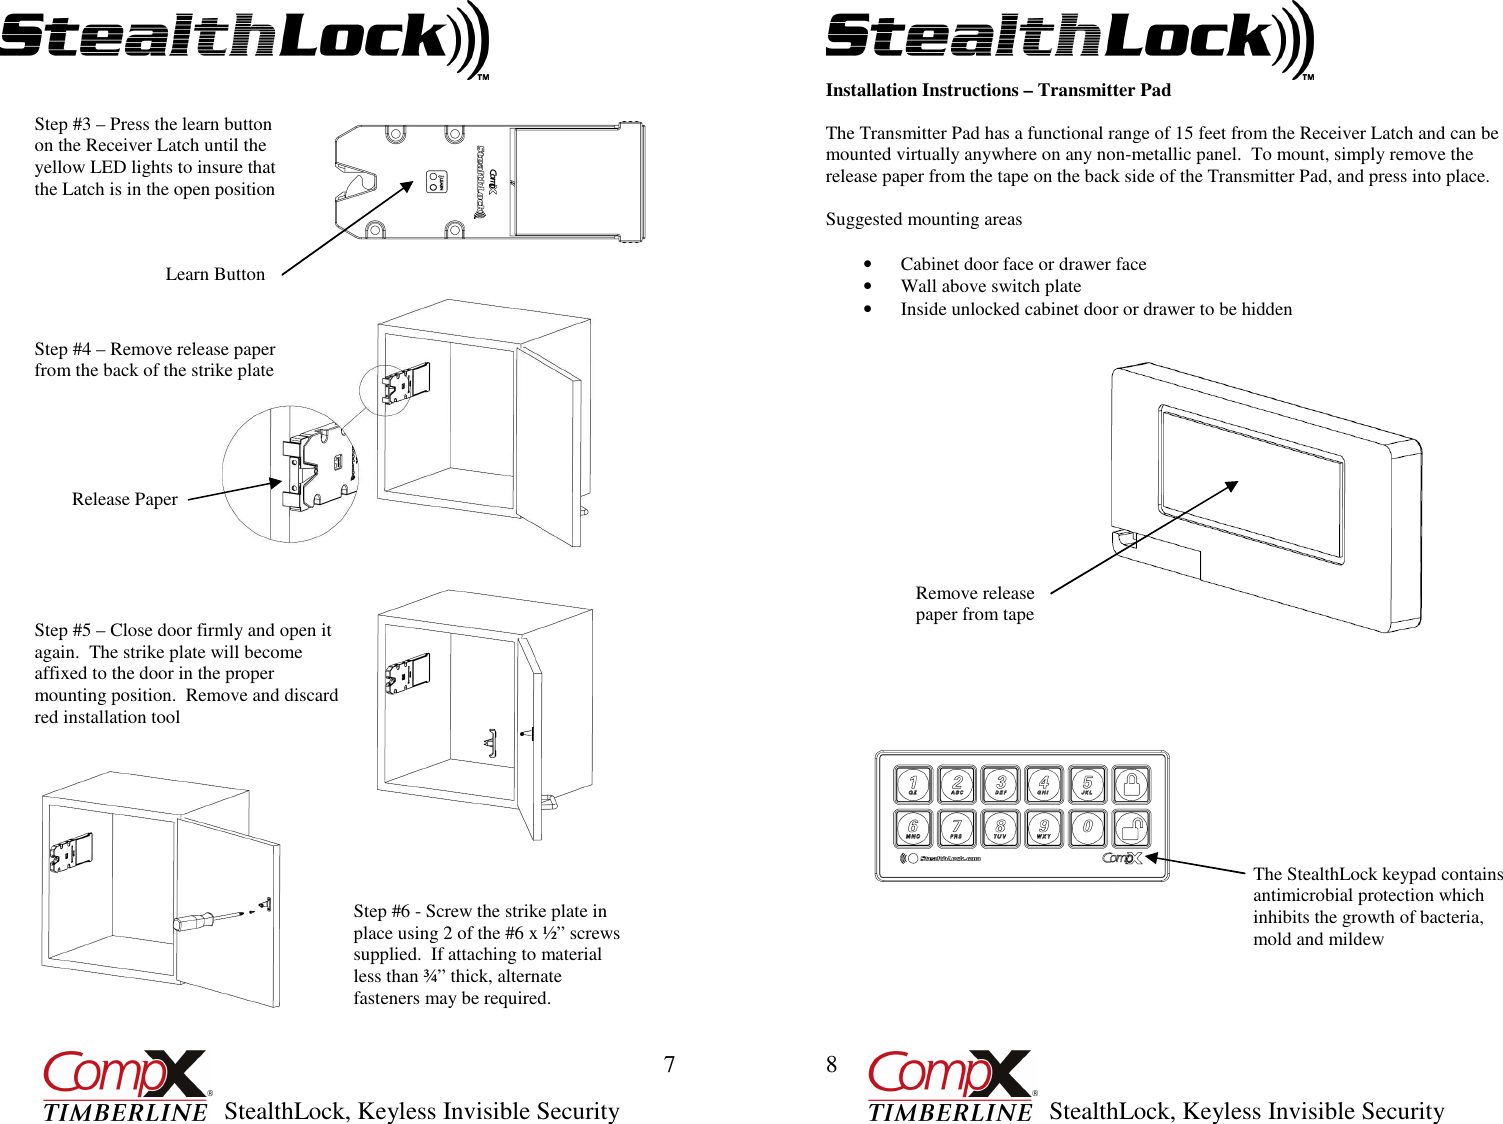         StealthLock, Keyless Invisible Security  7 Step #3 – Press the learn button on the Receiver Latch until the yellow LED lights to insure that the Latch is in the open position Step #4 – Remove release paper from the back of the strike plate Learn Button Release Paper Step #5 – Close door firmly and open it again.  The strike plate will become affixed to the door in the proper mounting position.  Remove and discard red installation tool  Step #6 - Screw the strike plate in place using 2 of the #6 x ½” screws supplied.  If attaching to material less than ¾” thick, alternate fasteners may be required.         StealthLock, Keyless Invisible Security  8 Installation Instructions – Transmitter Pad  The Transmitter Pad has a functional range of 15 feet from the Receiver Latch and can be mounted virtually anywhere on any non-metallic panel.  To mount, simply remove the release paper from the tape on the back side of the Transmitter Pad, and press into place.  Suggested mounting areas    • Cabinet door face or drawer face • Wall above switch plate • Inside unlocked cabinet door or drawer to be hidden                               Remove release paper from tape The StealthLock keypad contains antimicrobial protection which inhibits the growth of bacteria, mold and mildew 